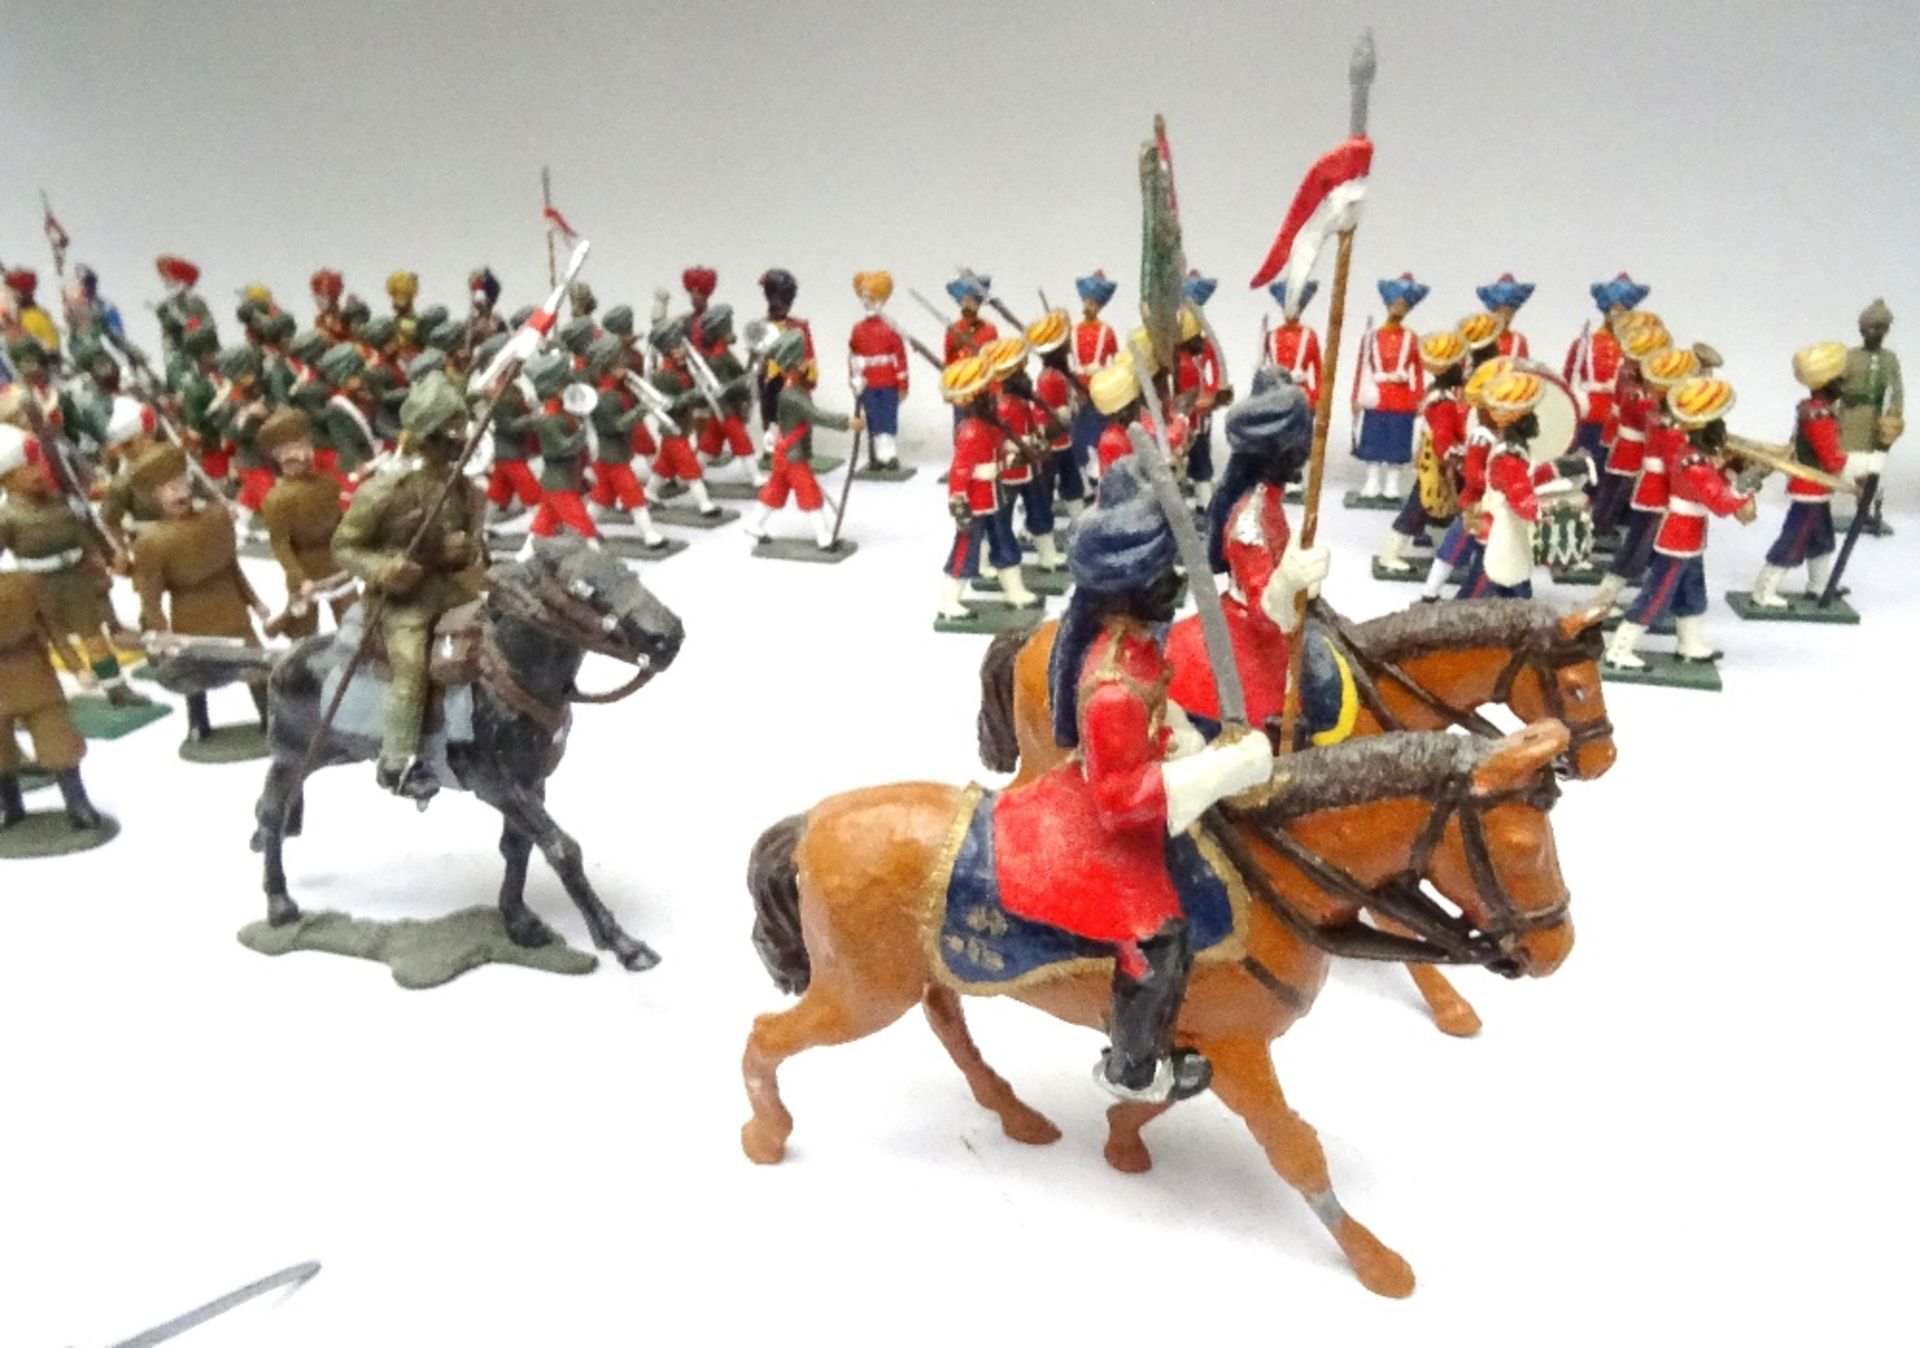 British Indian Army by various New Toy Soldier Makers - Image 9 of 13